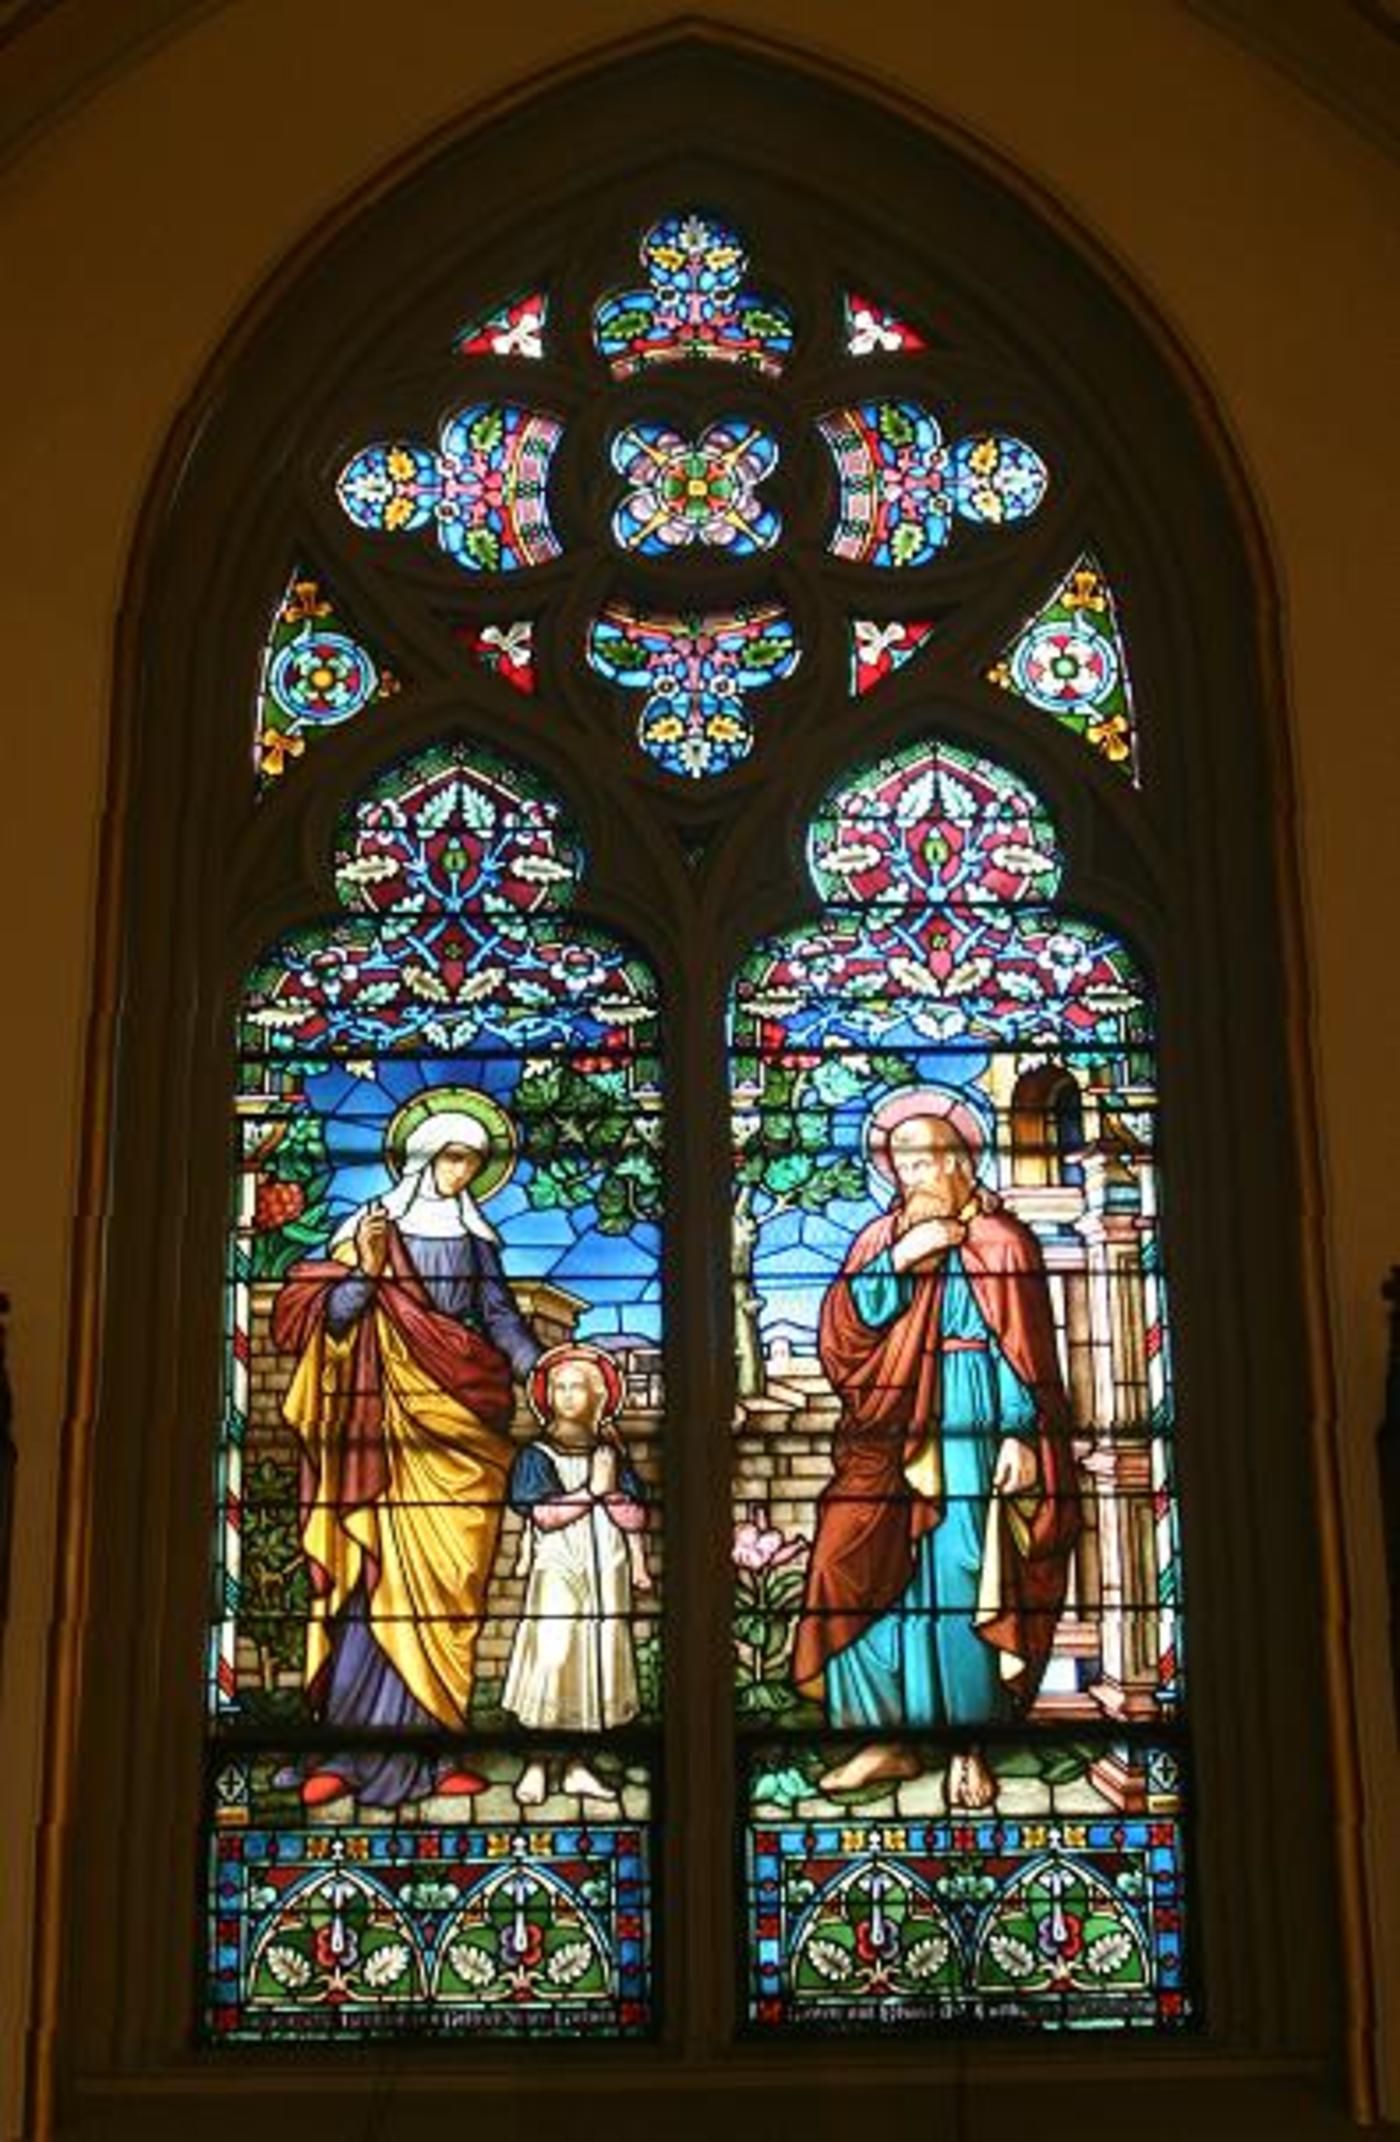 Windows 6A and 6B: St. Joachim and St. Anne with child Mary